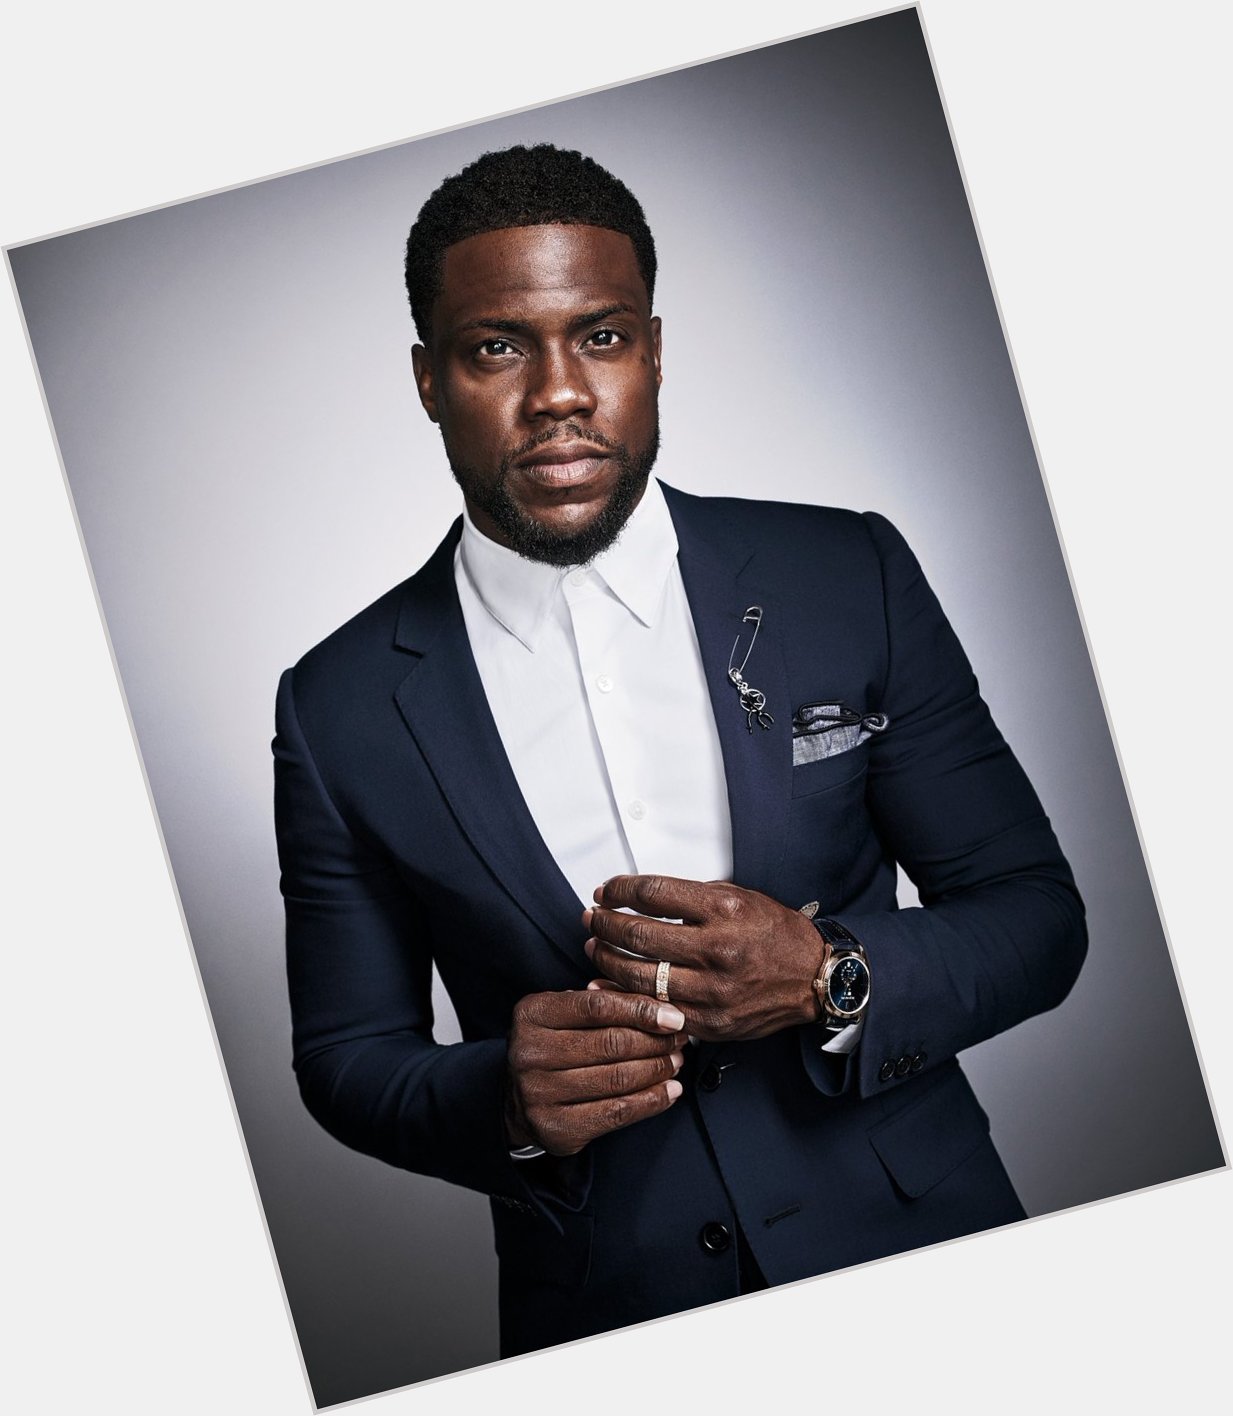 American Comedian & actor turns 39 years old today! Happy Birthday Kevin Hart! 